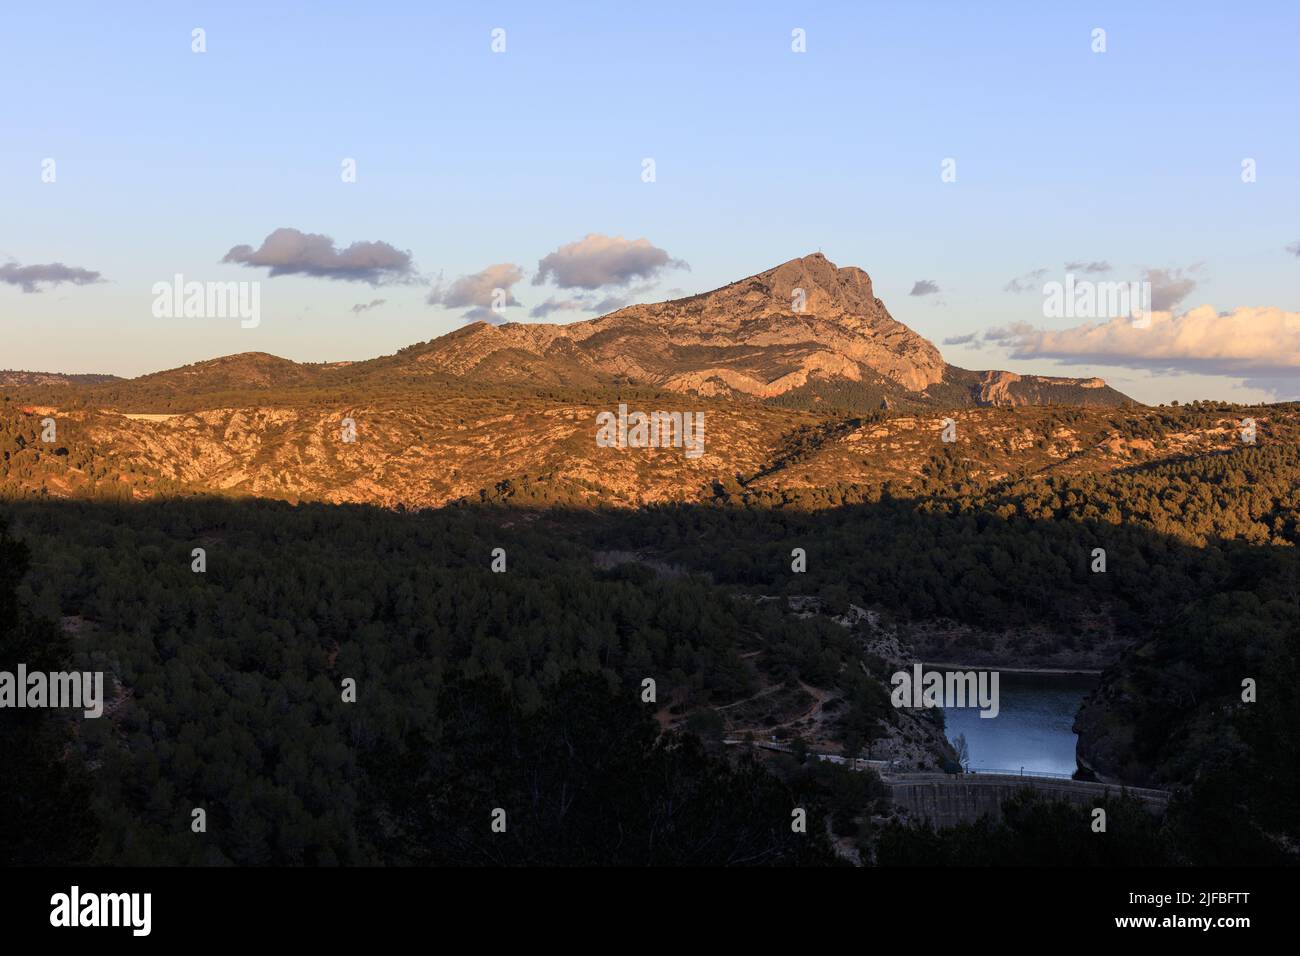 France, Bouches du Rhone, Pays d'Aix, Aix en Provence, Bibemus plateau, the Sainte Victoire mountain and the Zola dam in the foreground Stock Photo